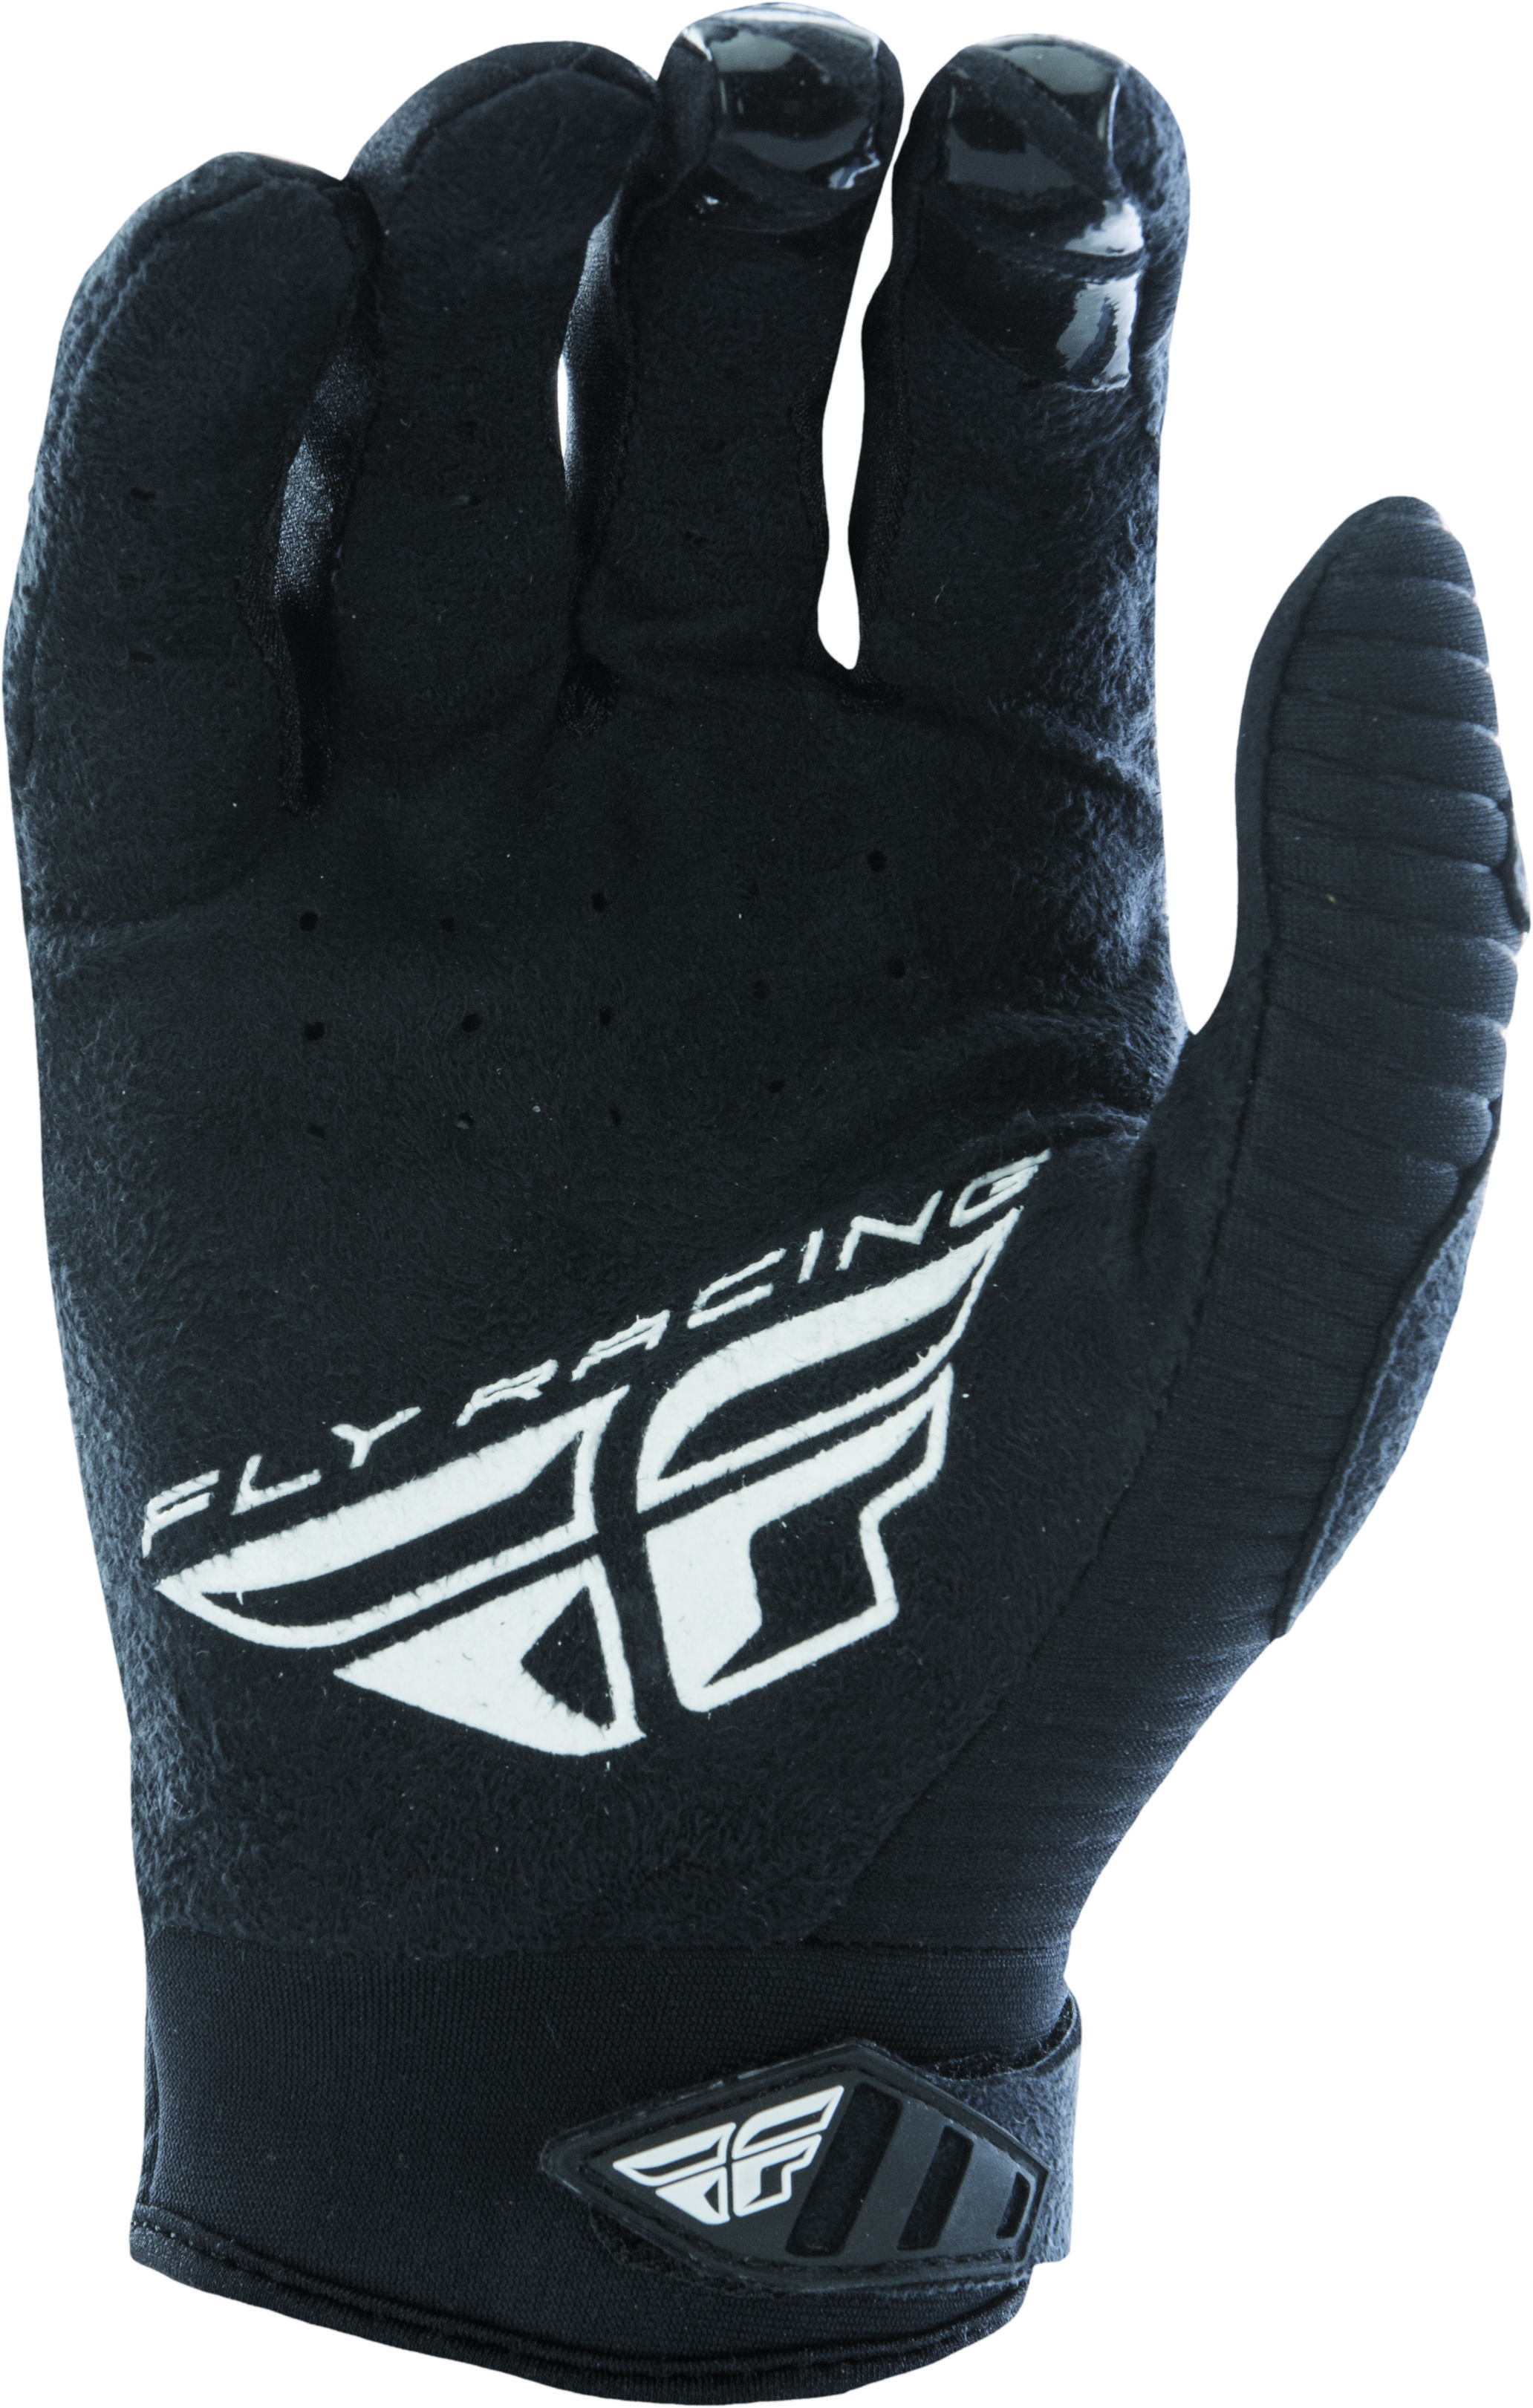 Patrol Xc Lite Riding Gloves For MX & Off-Road Black Size 11 - Click Image to Close